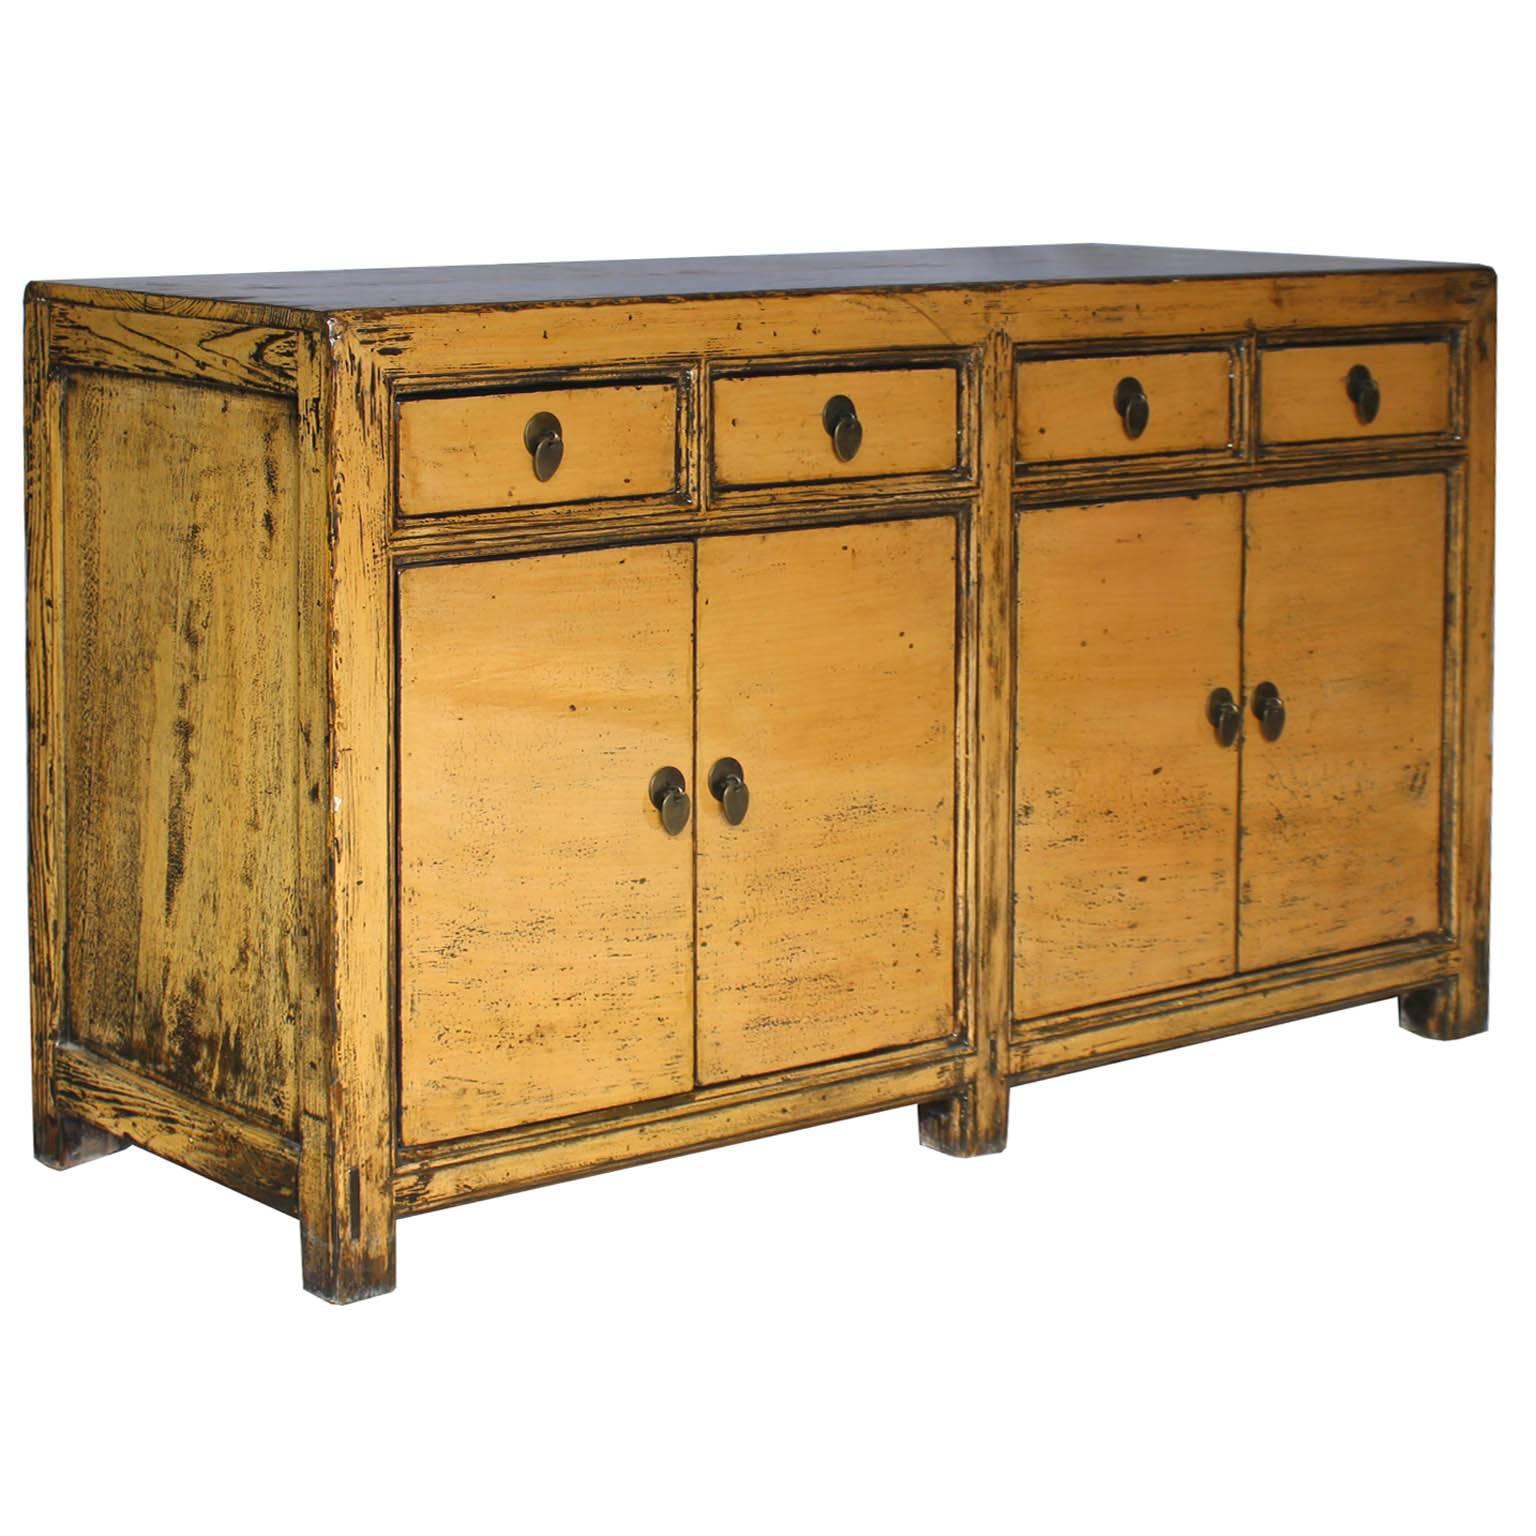 Four-door sideboard with butterscotch lacquer finish with clean lines and exposed wood edges. New interior shelves and hardware. Place in a contemporary living room below a flat screen TV, behind a sofa or use as a buffet in the dining room, circa